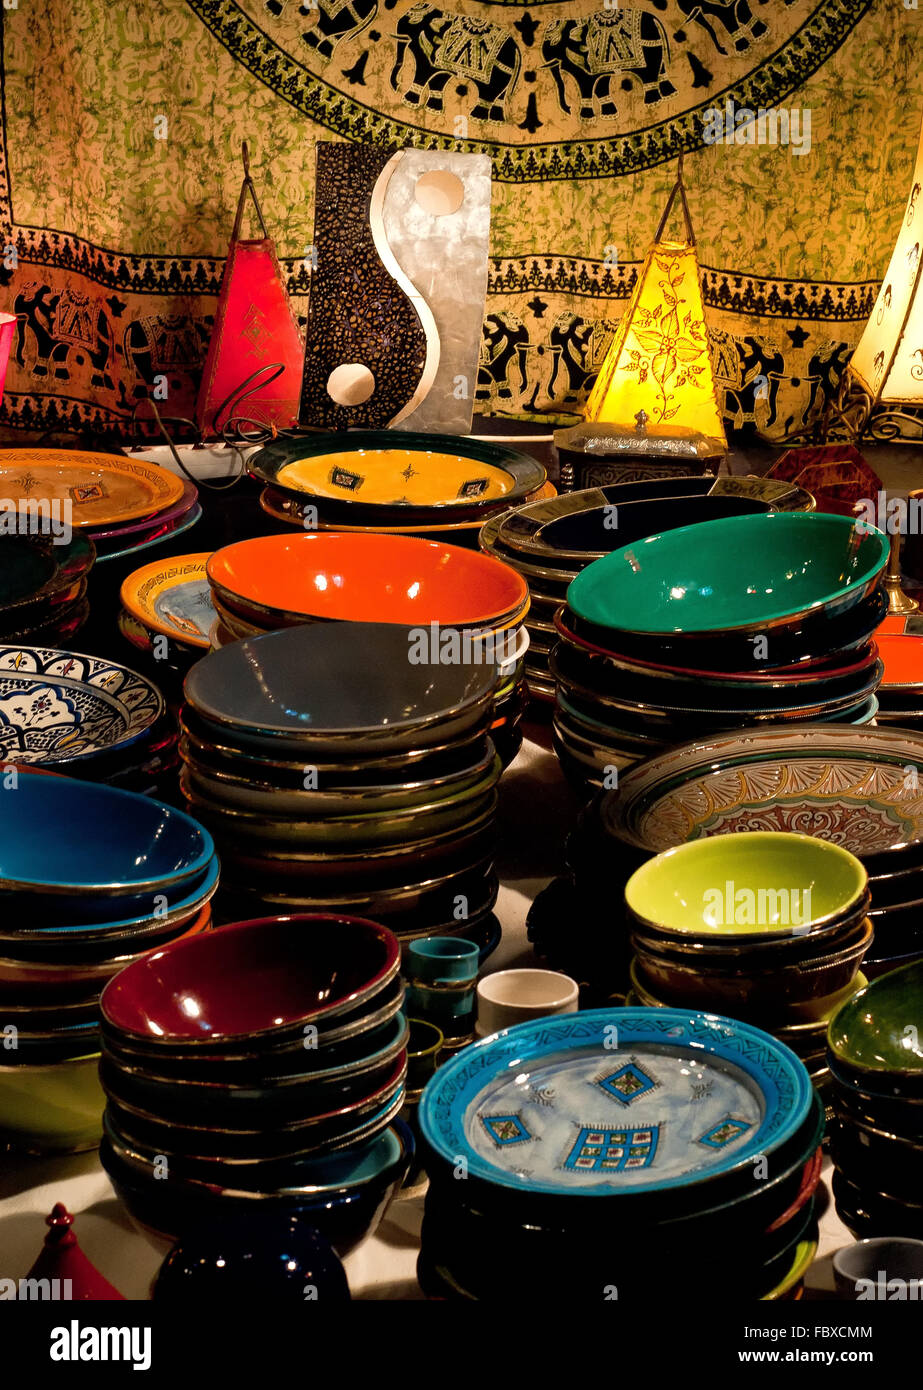 Clay bowls and plates Stock Photo